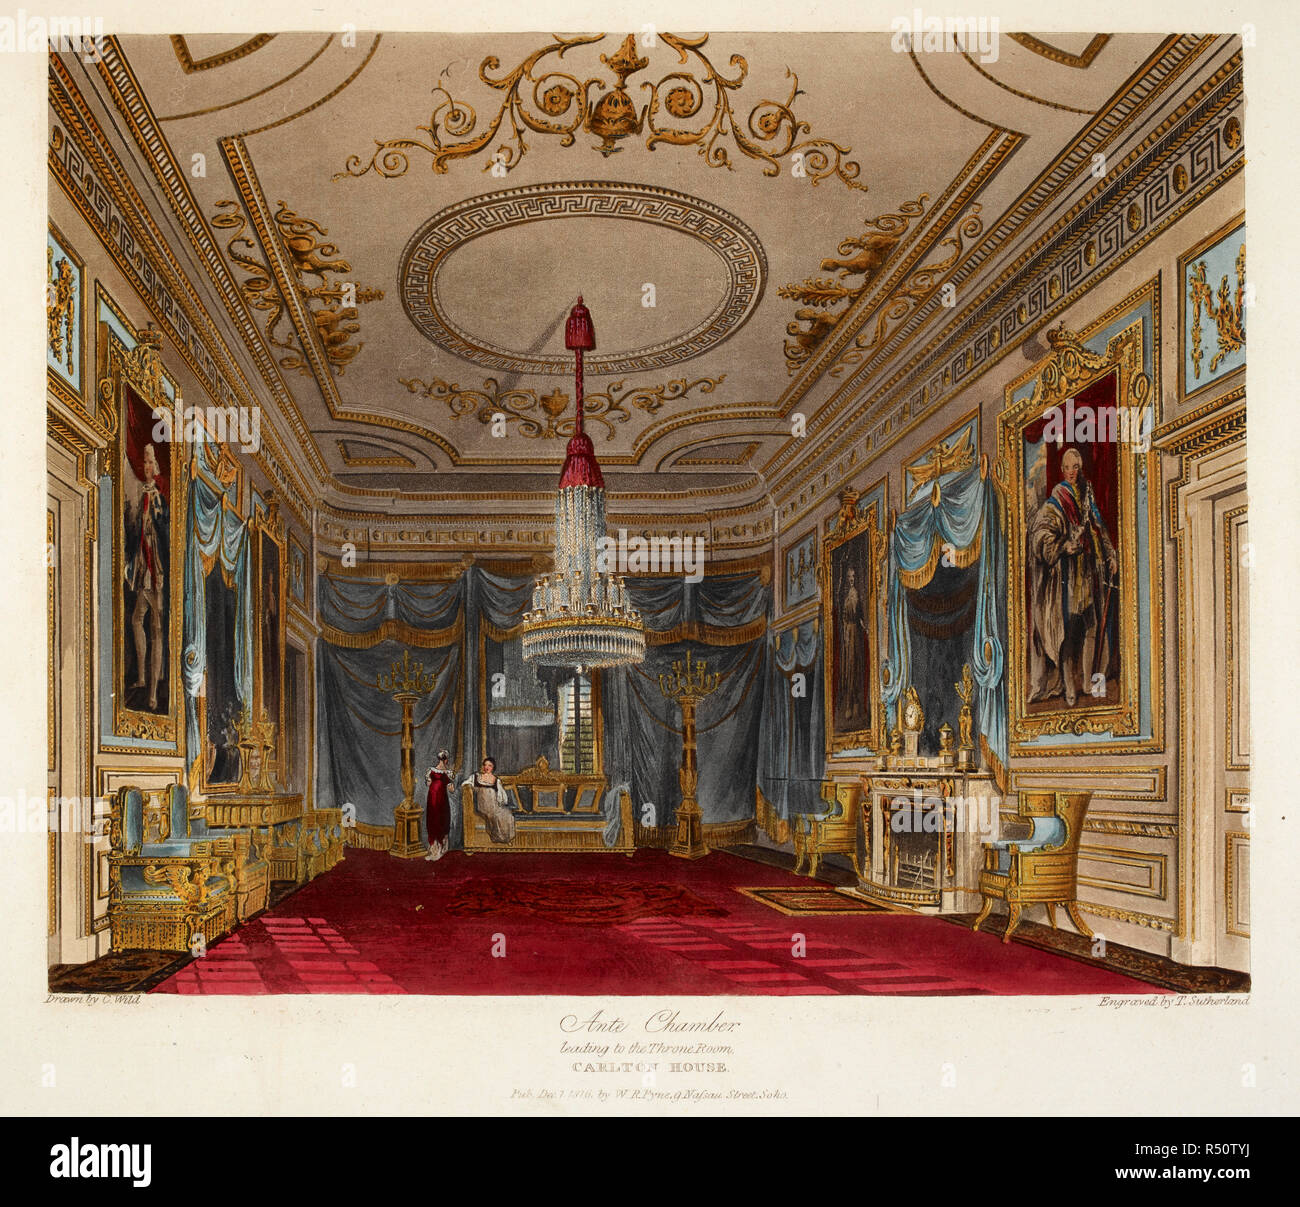 Ante chamber leading to the throne room at Carlton house, Colour illustration / plate. Author William Henry Pyne,. Museum: BRITISH LIBRARY. Stock Photo